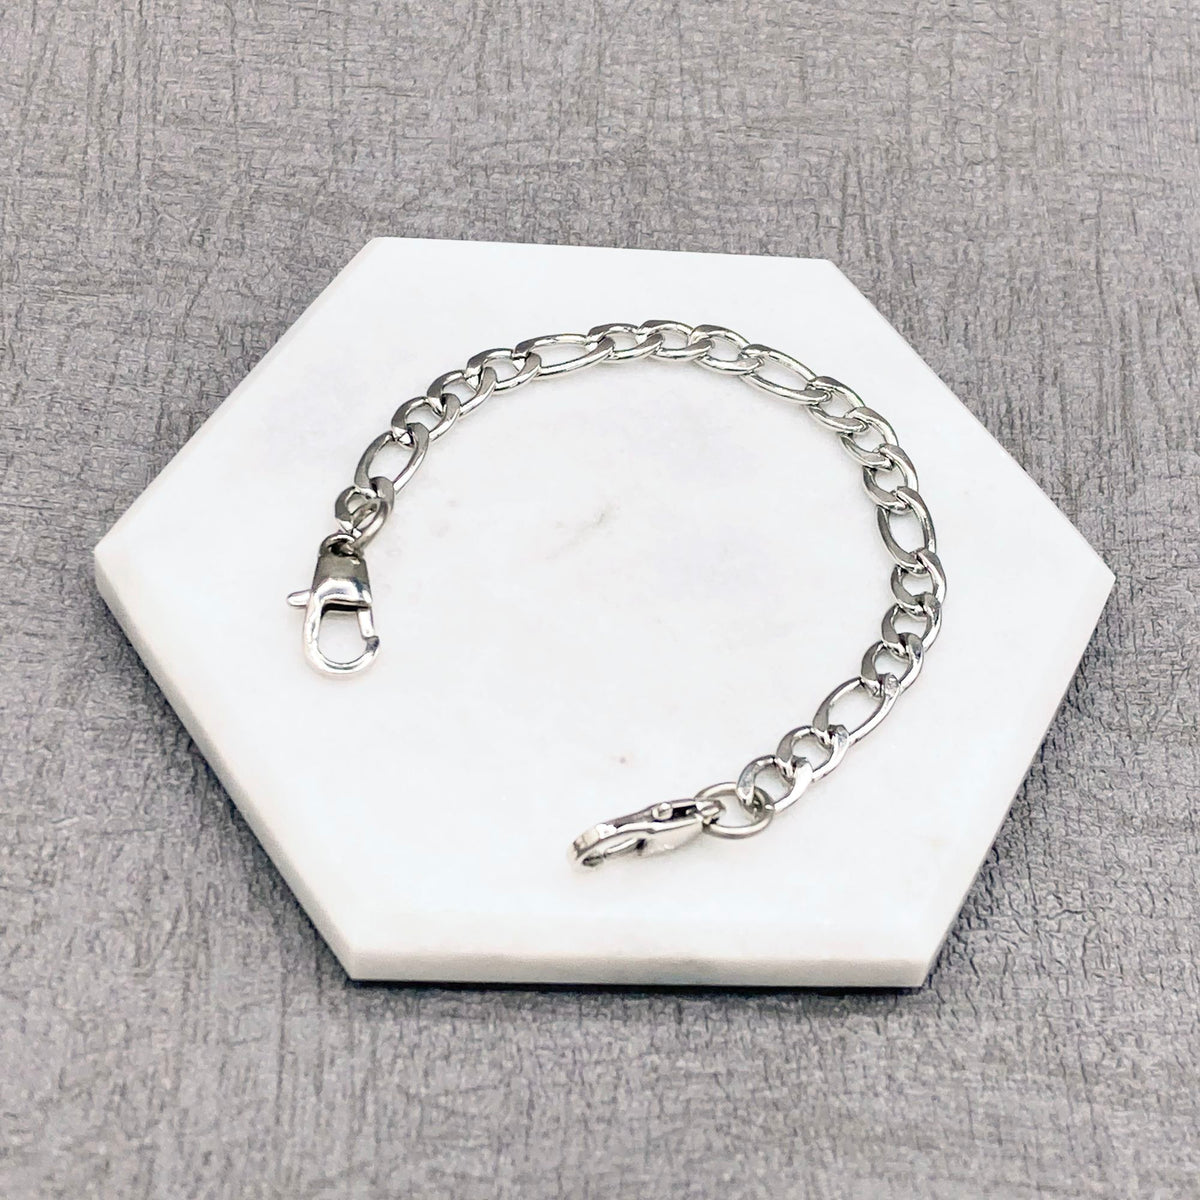 medical bracelet replacement chain figaro uk